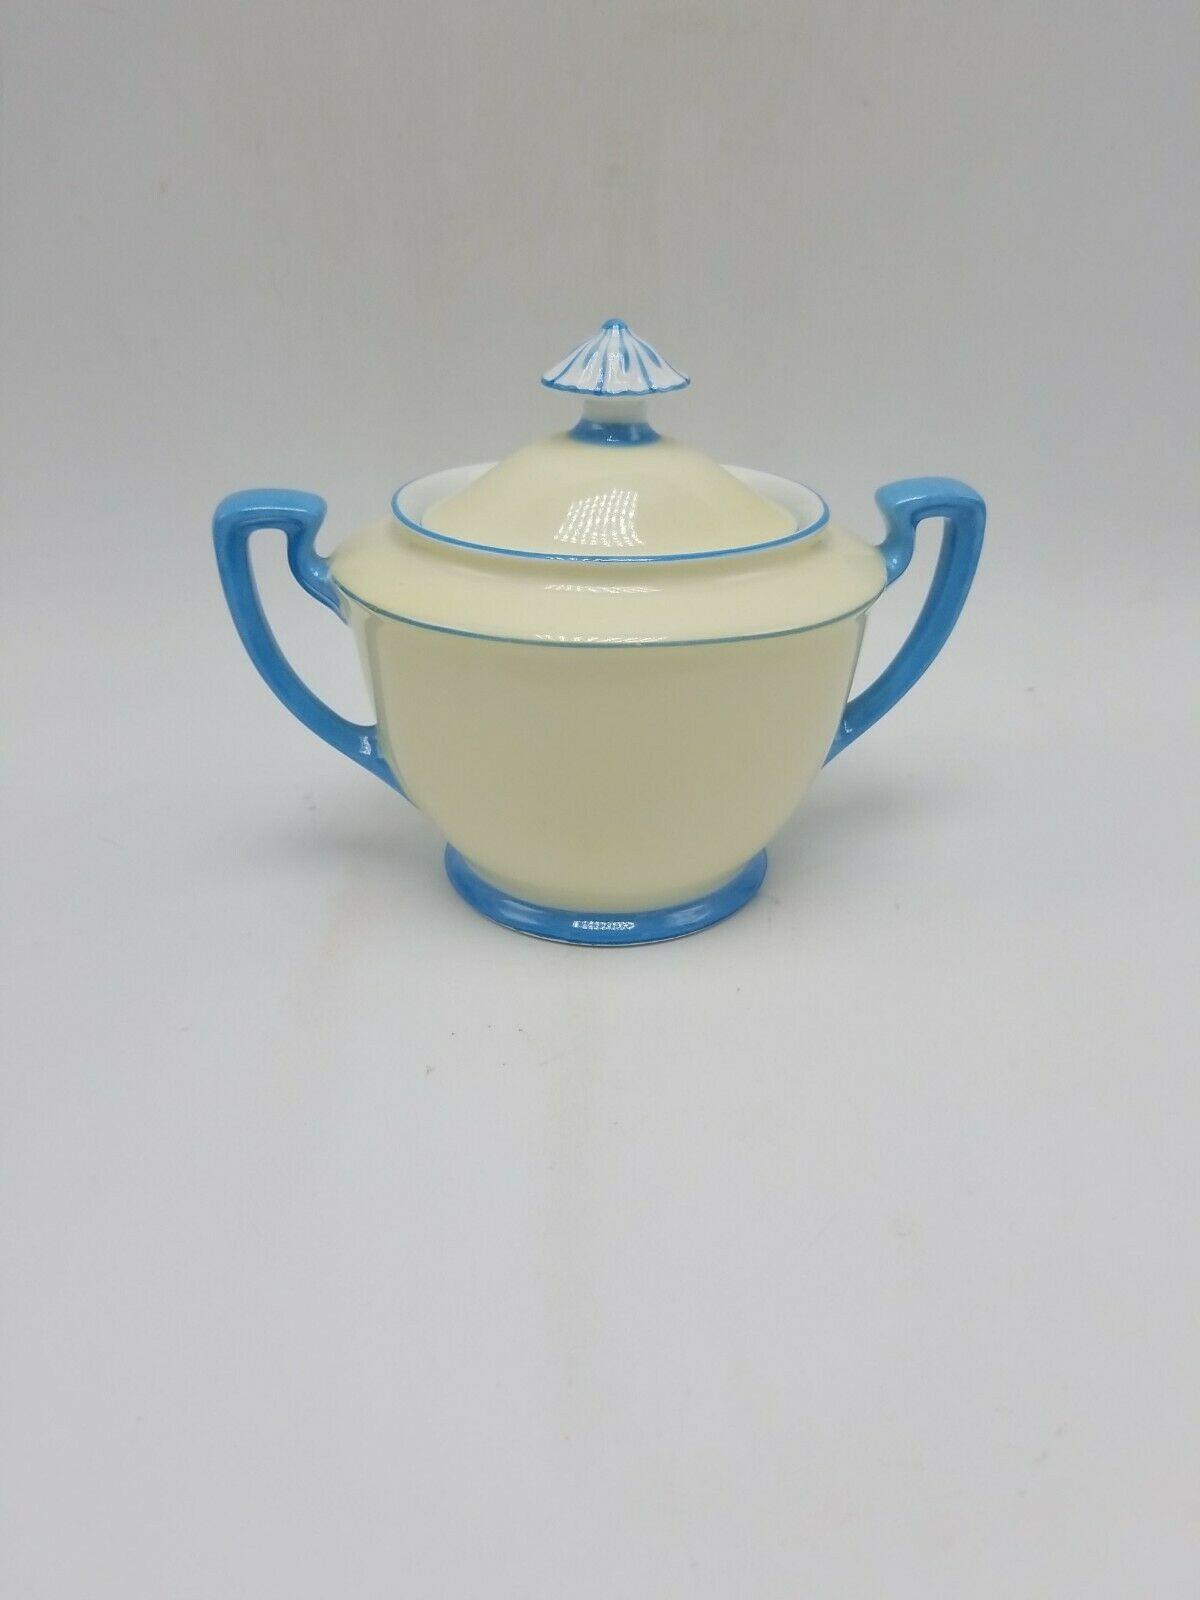 Noritake "n3326" Sugar Bowl And Lid - Mint Condition Yellow & Blue